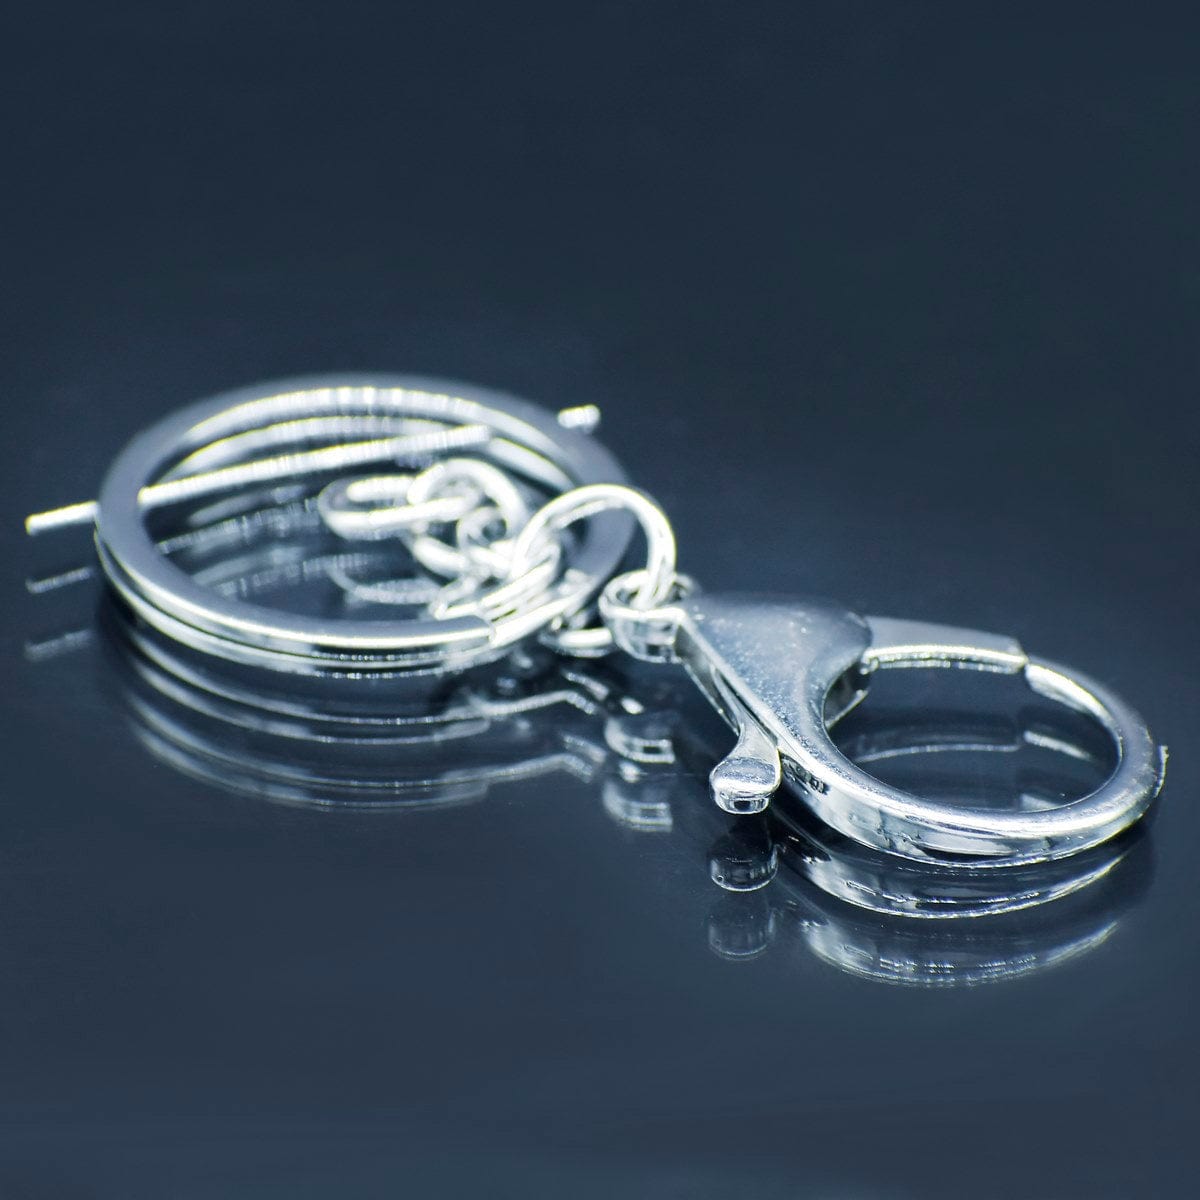 jags-mumbai Resin Accessories And More Key Chain Fitting Silver With Hook 5Pcs KF5PCSR